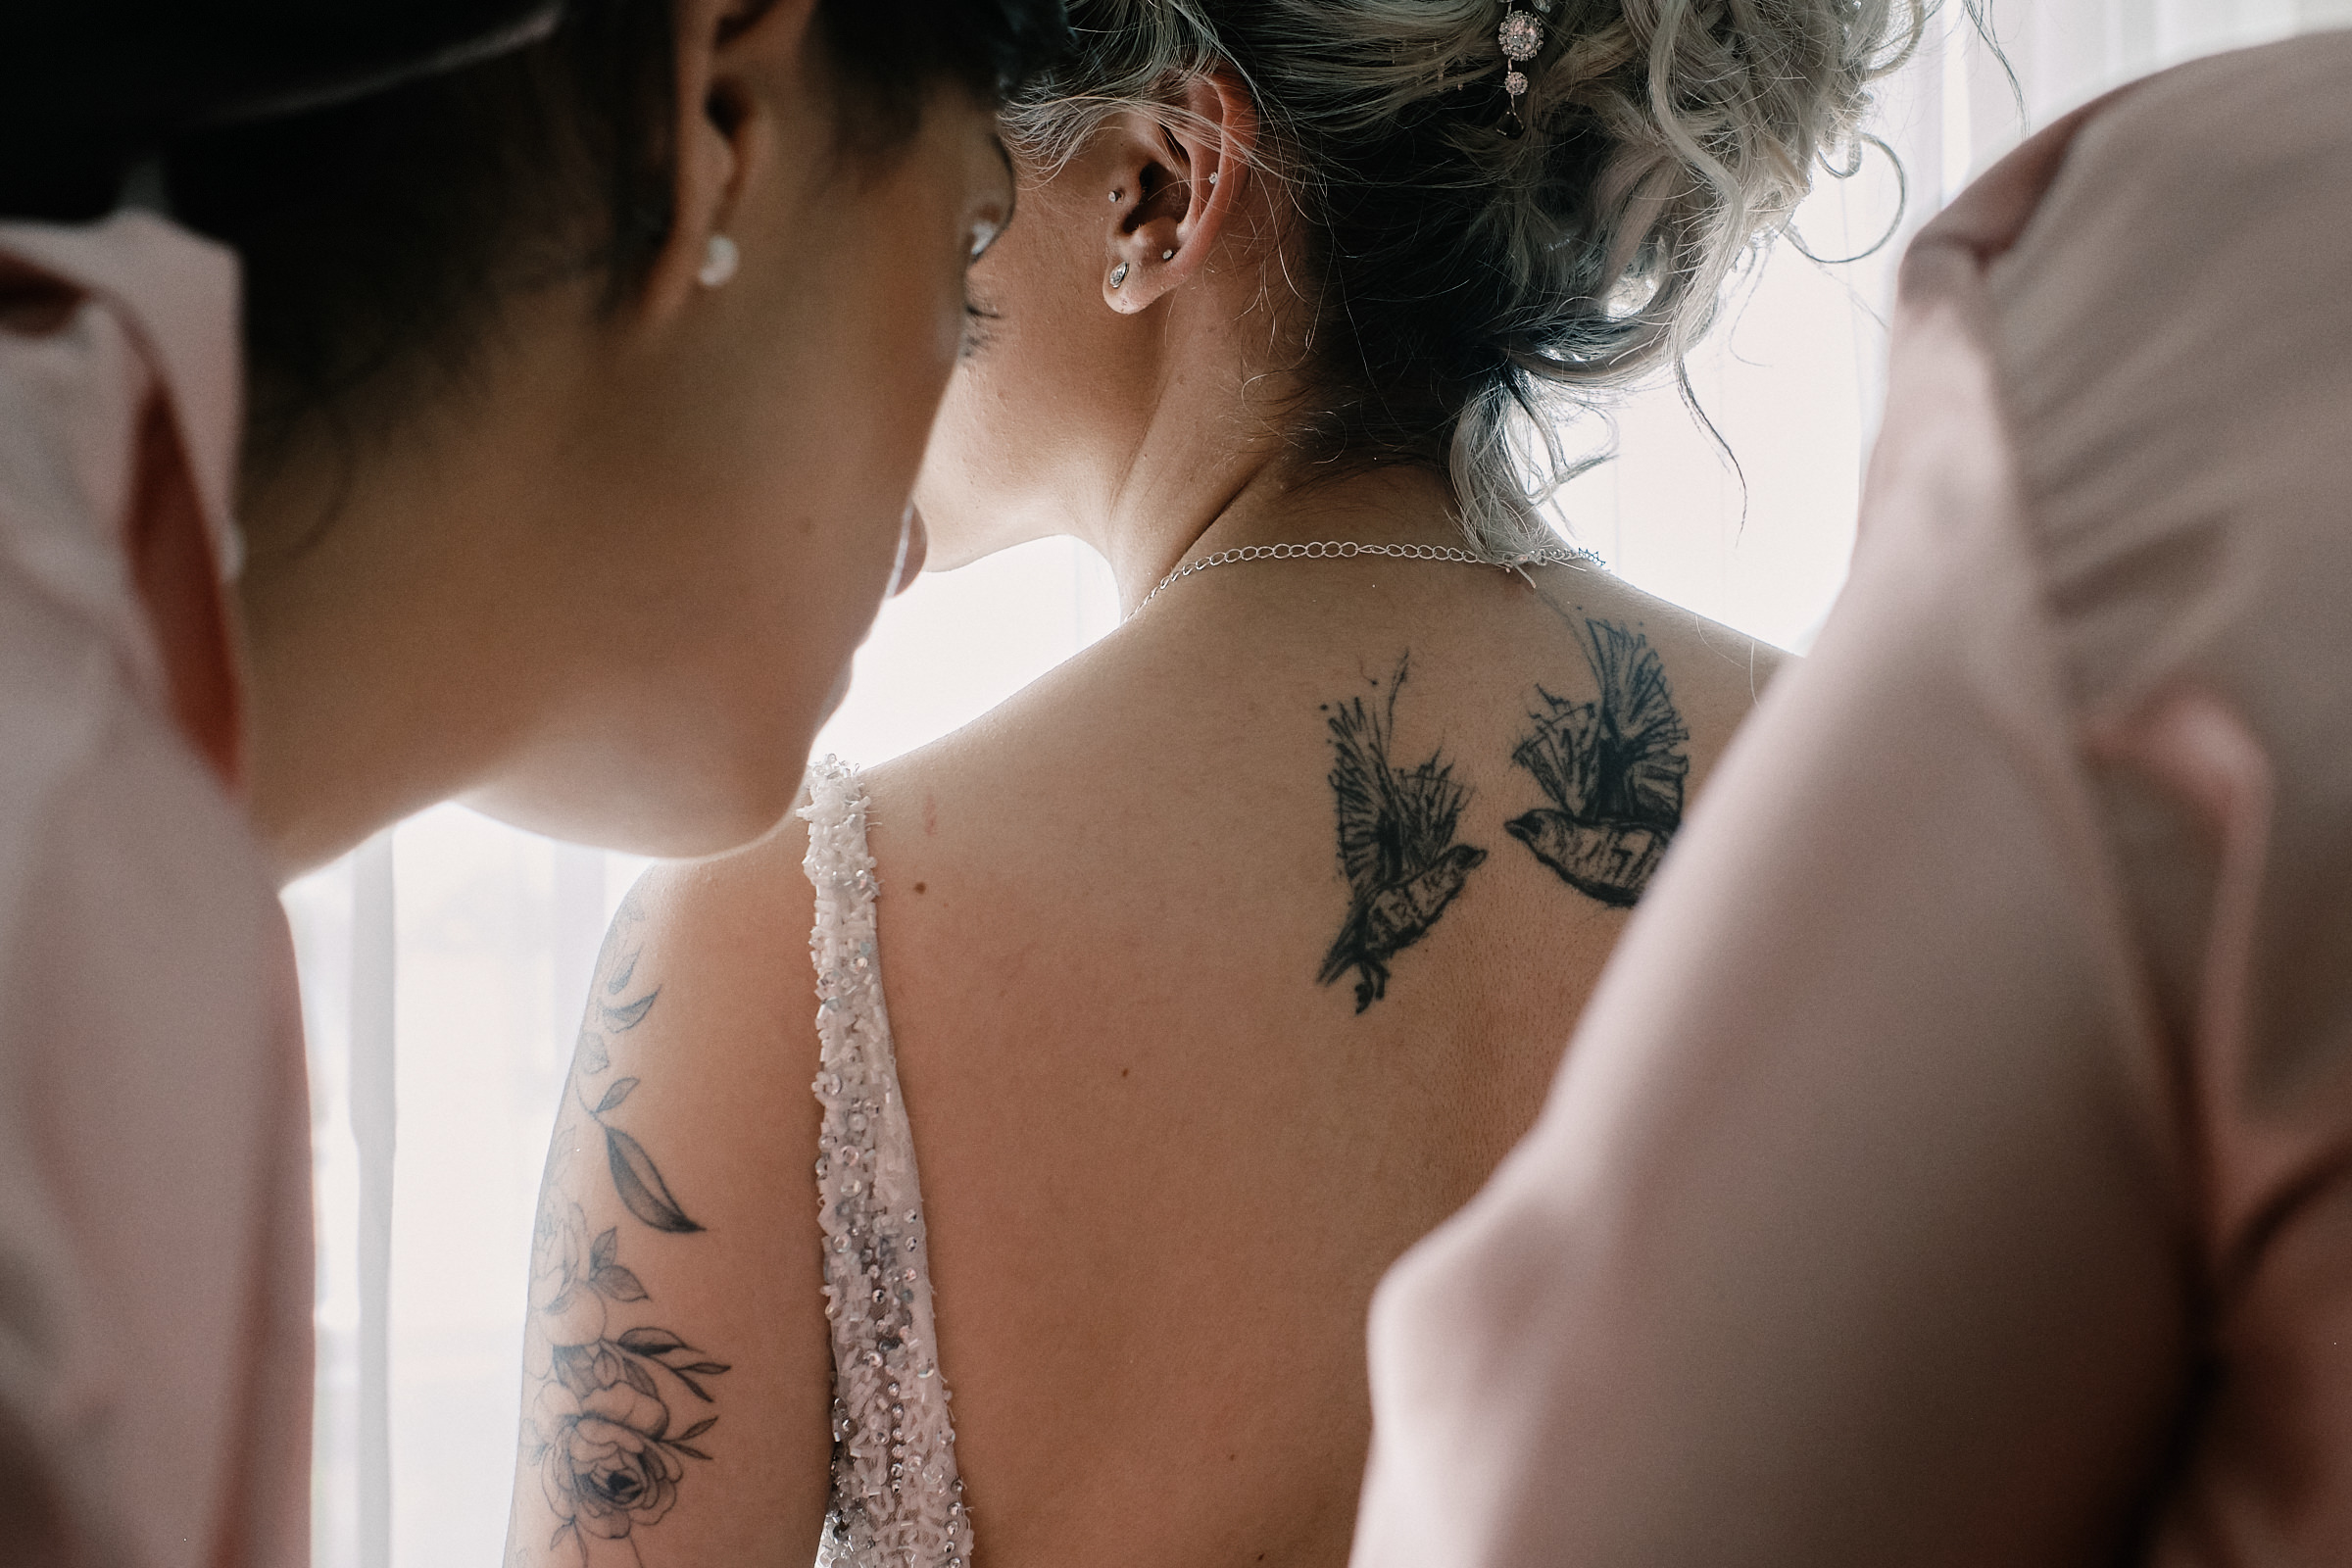 Bride With Tattoo In Her Back At Destination Wedding In Mexico